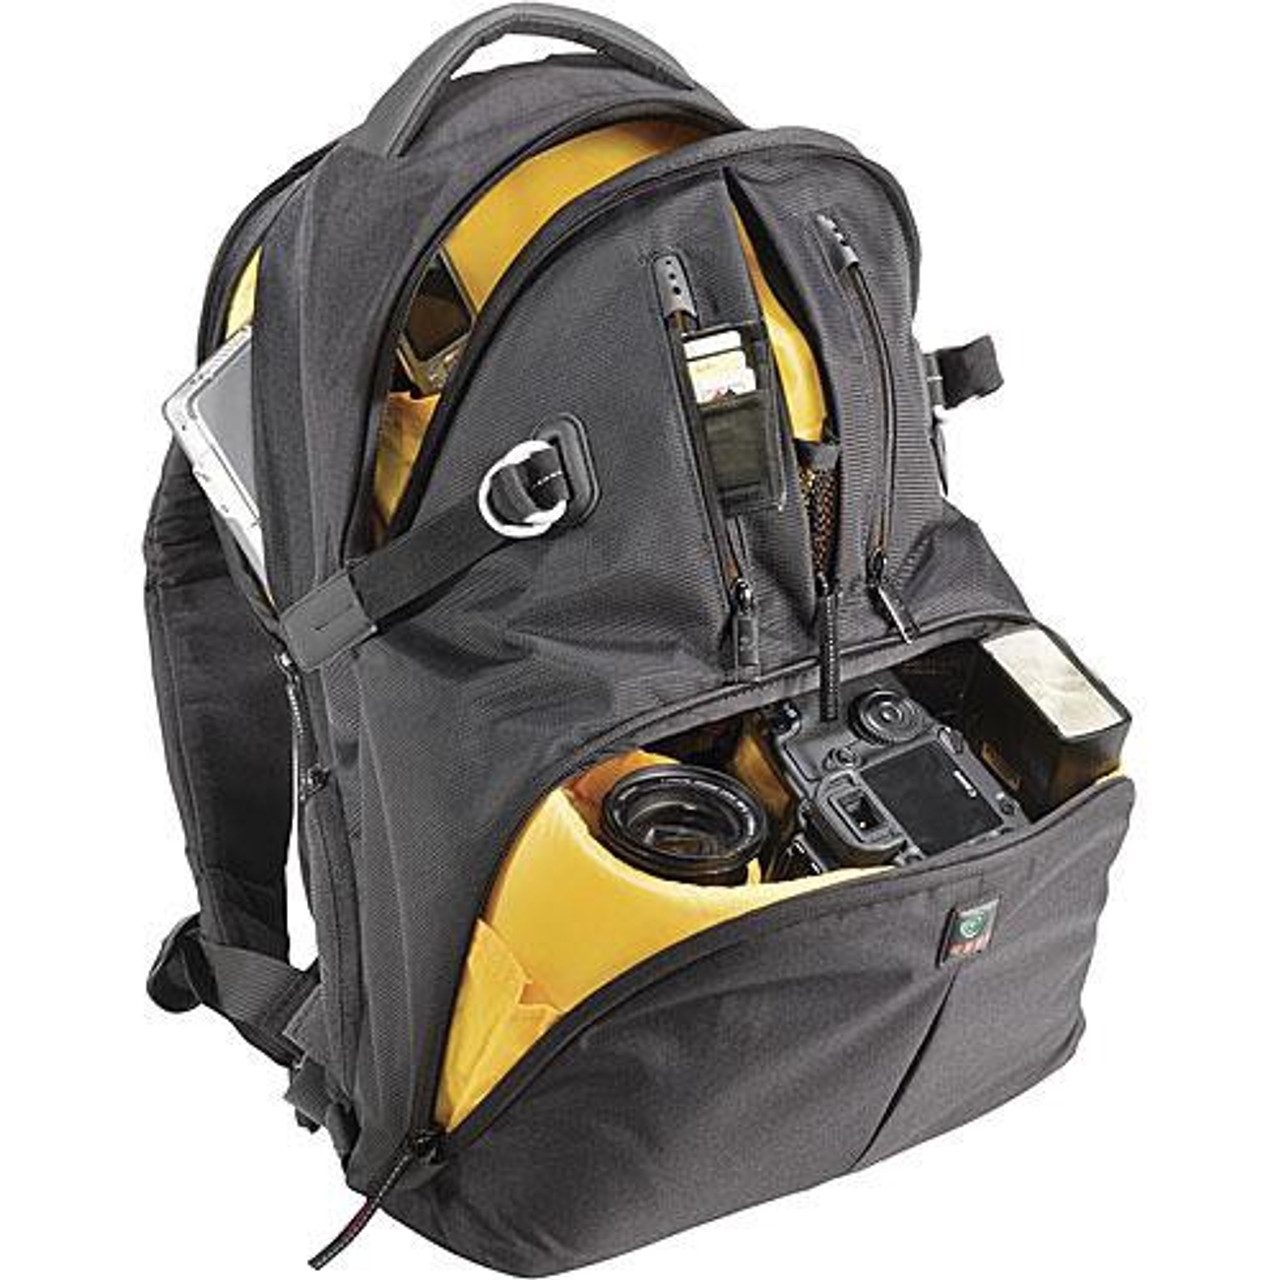 Kata Bags brand disappears & becomes Manfrotto | CineD